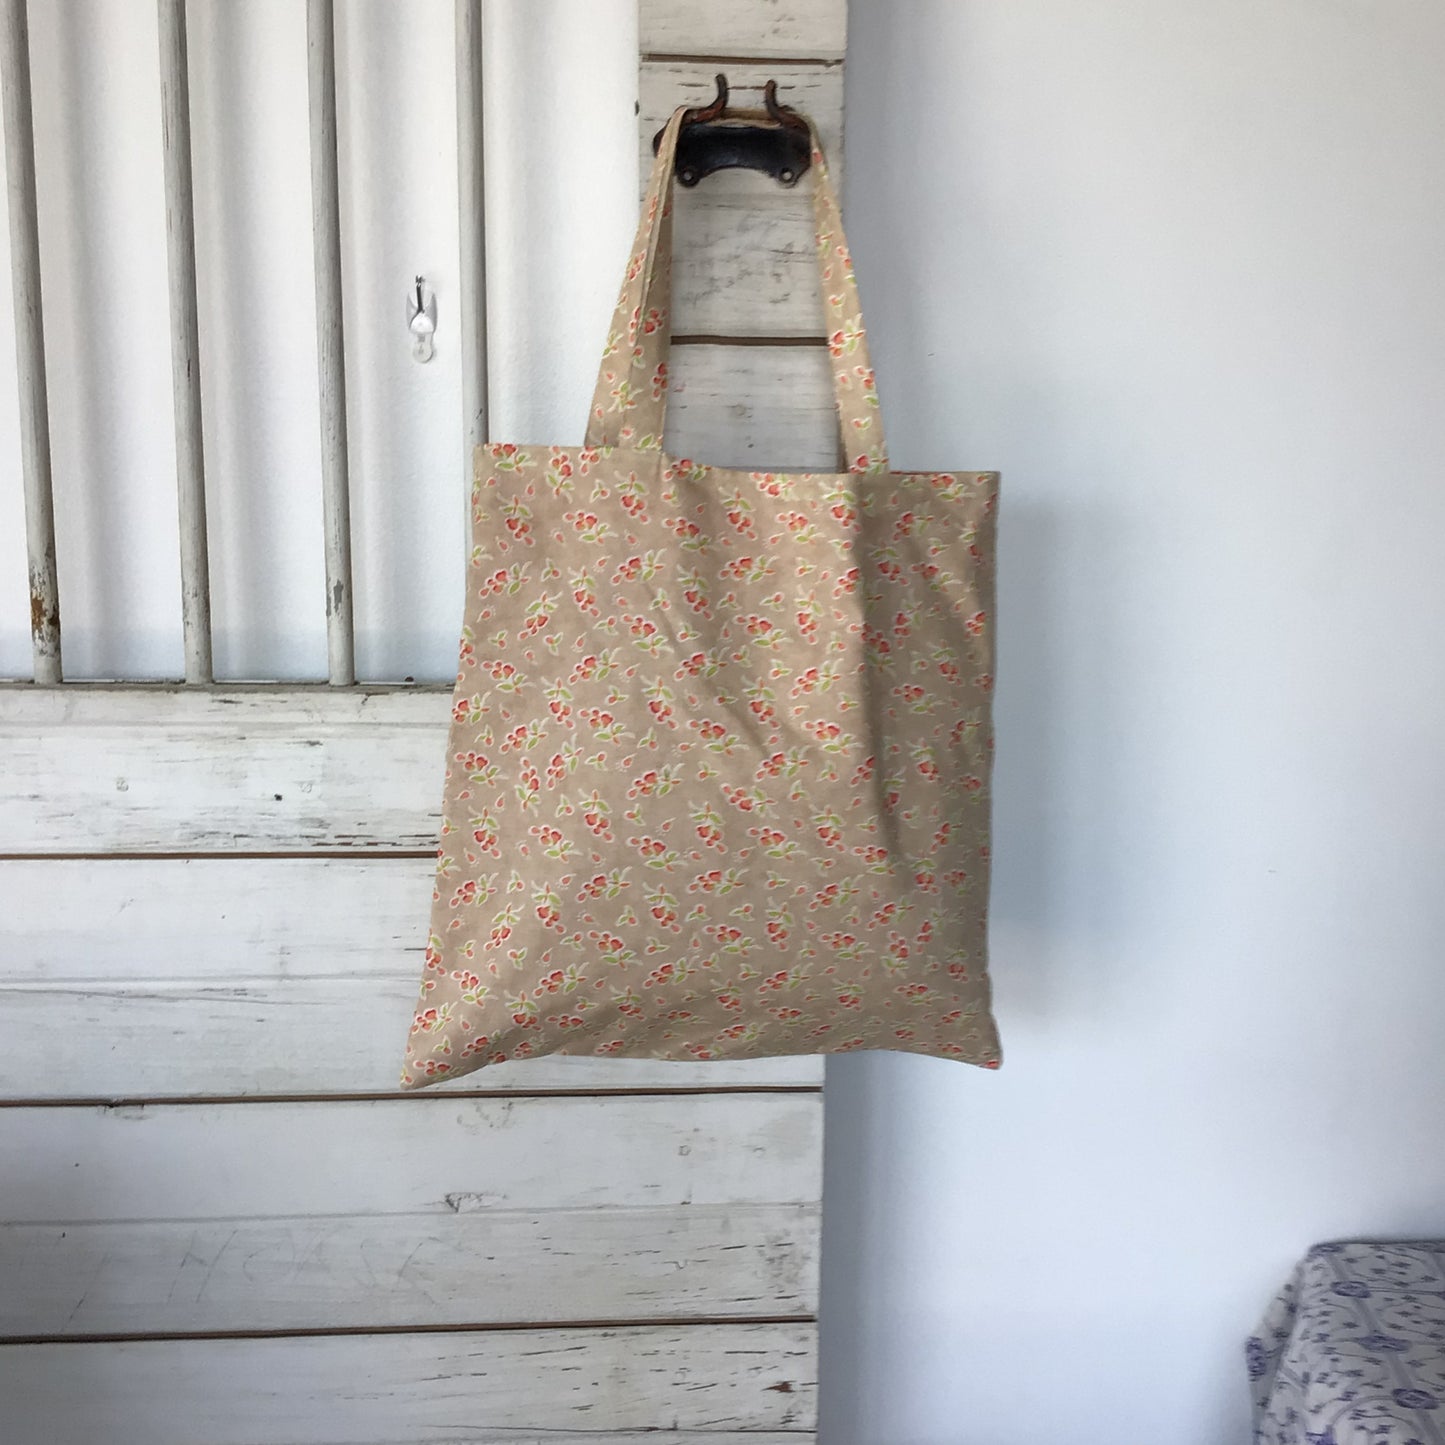 Simple Tote Bag Kit - Figgy Tan and Red